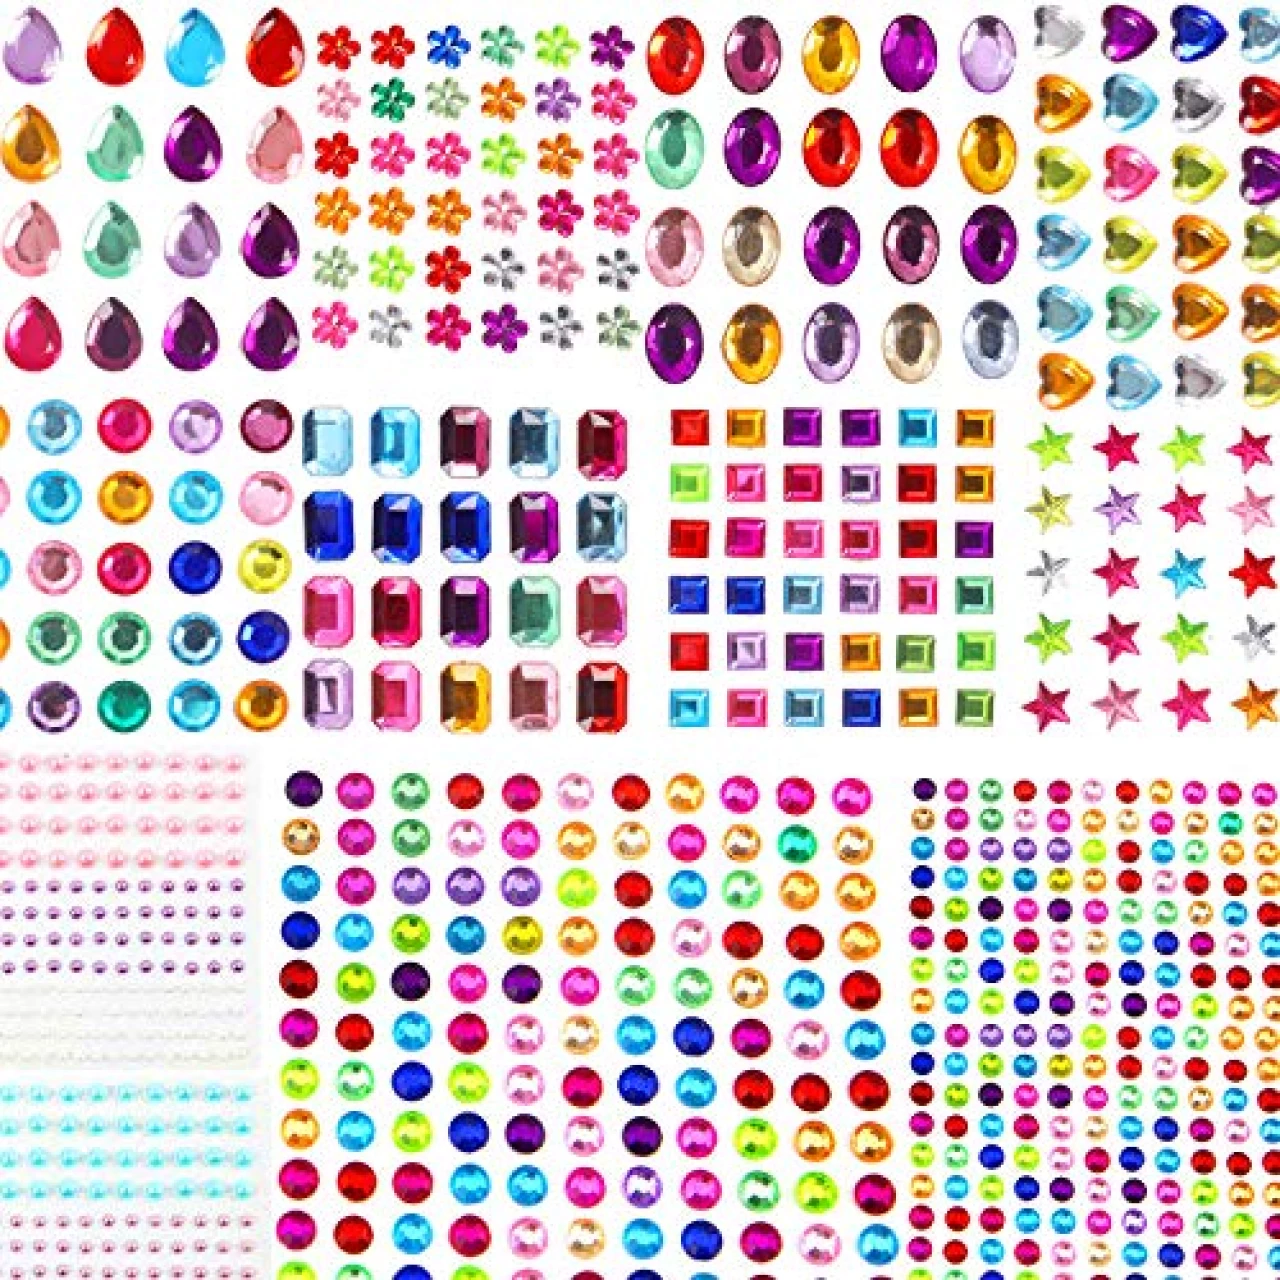 1782pcs Gems Stickers, Self Adhesive Gems for Crafts Bling Rhinestones for Crafts, Assorted Shapes Jewels Rhinestones Stickers, Muticolor